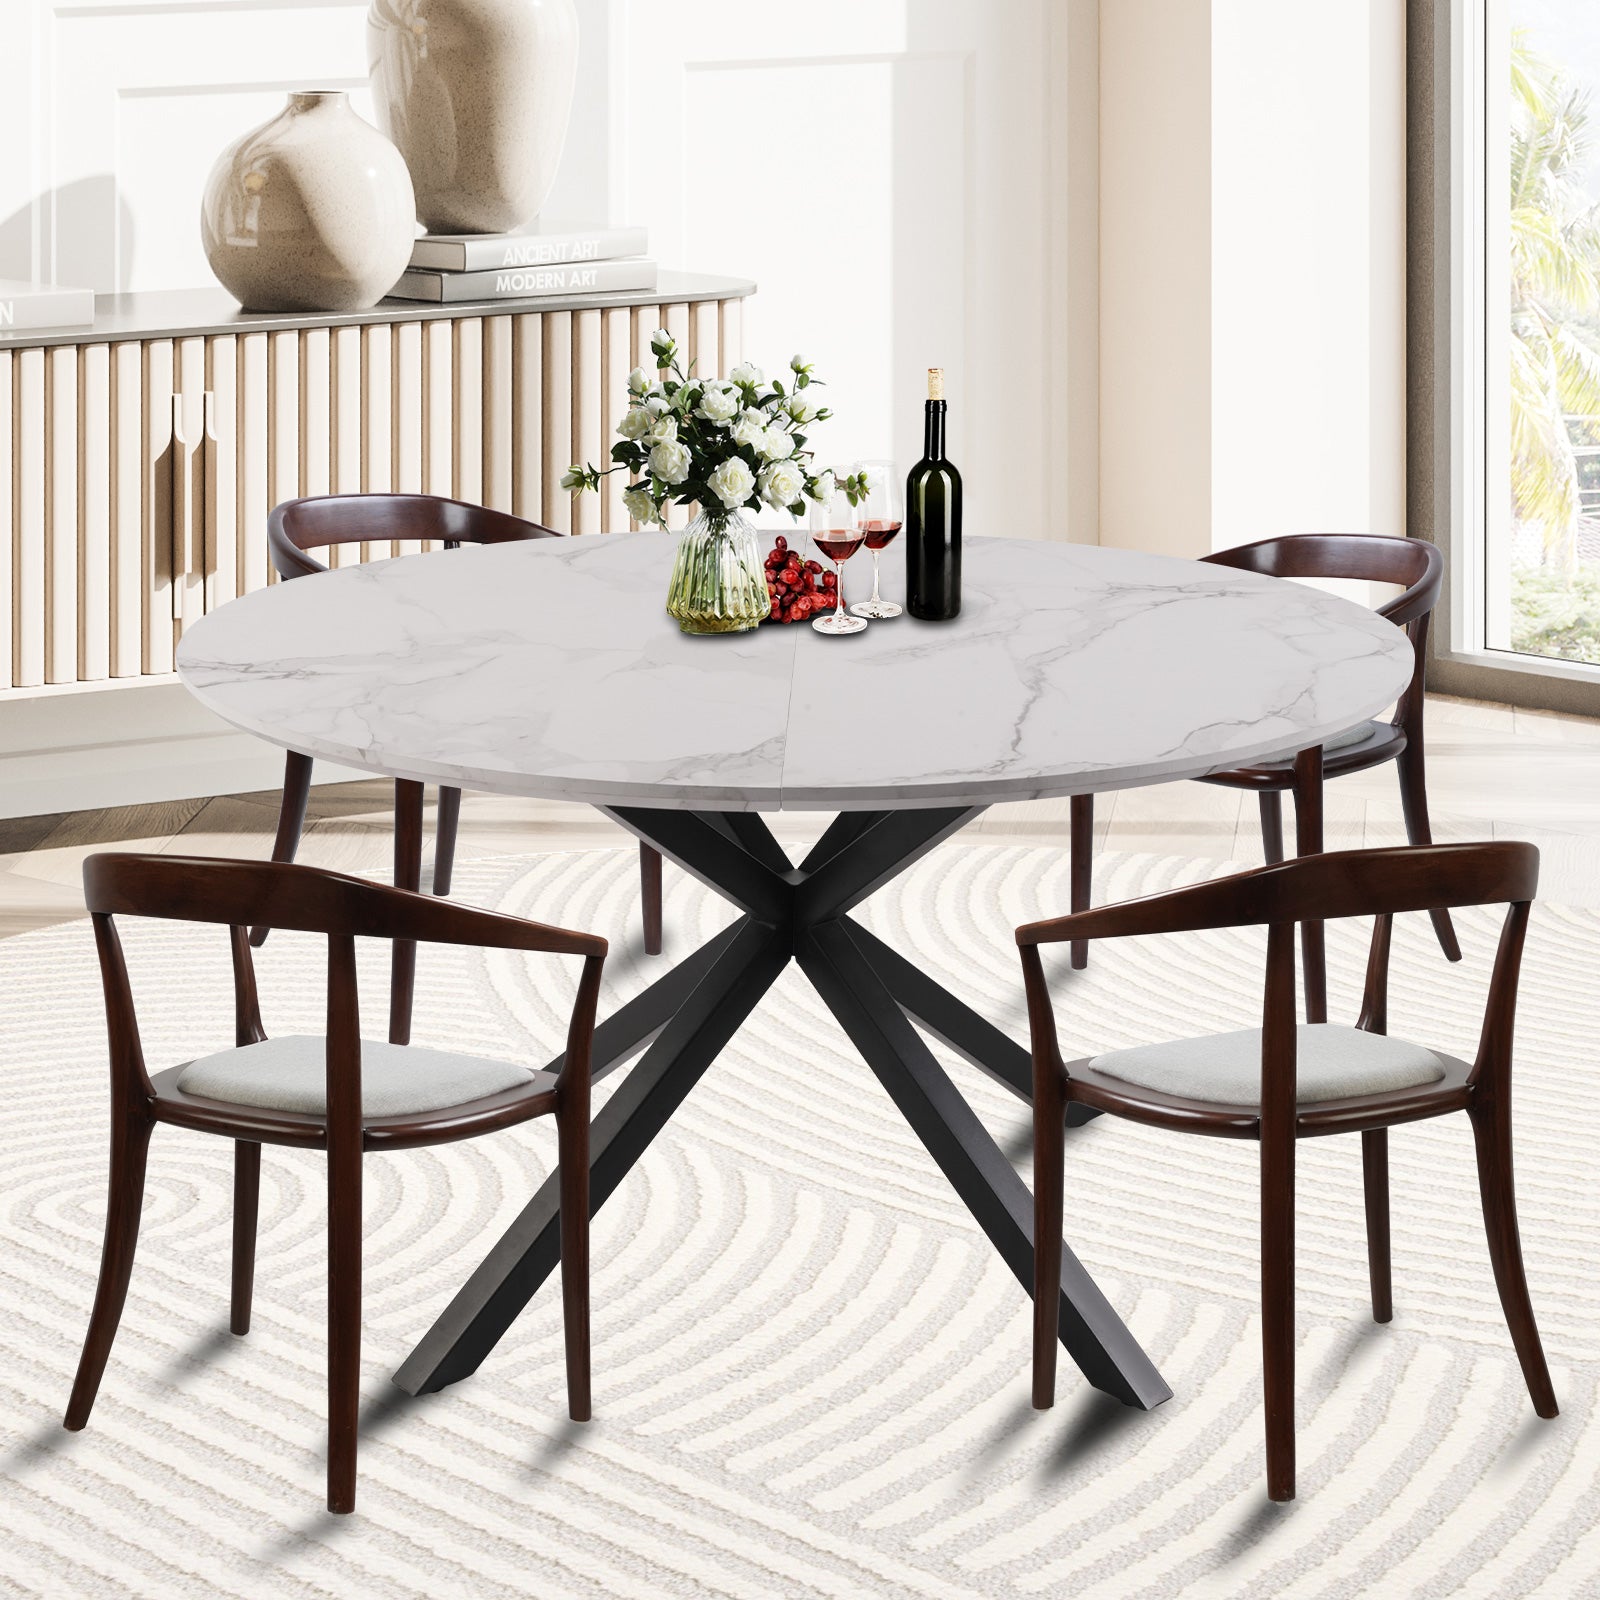 53" Mid-Century Modern Round Dining Room Table for 4-6 Person W/Solid Metal Legs, Marble Texture